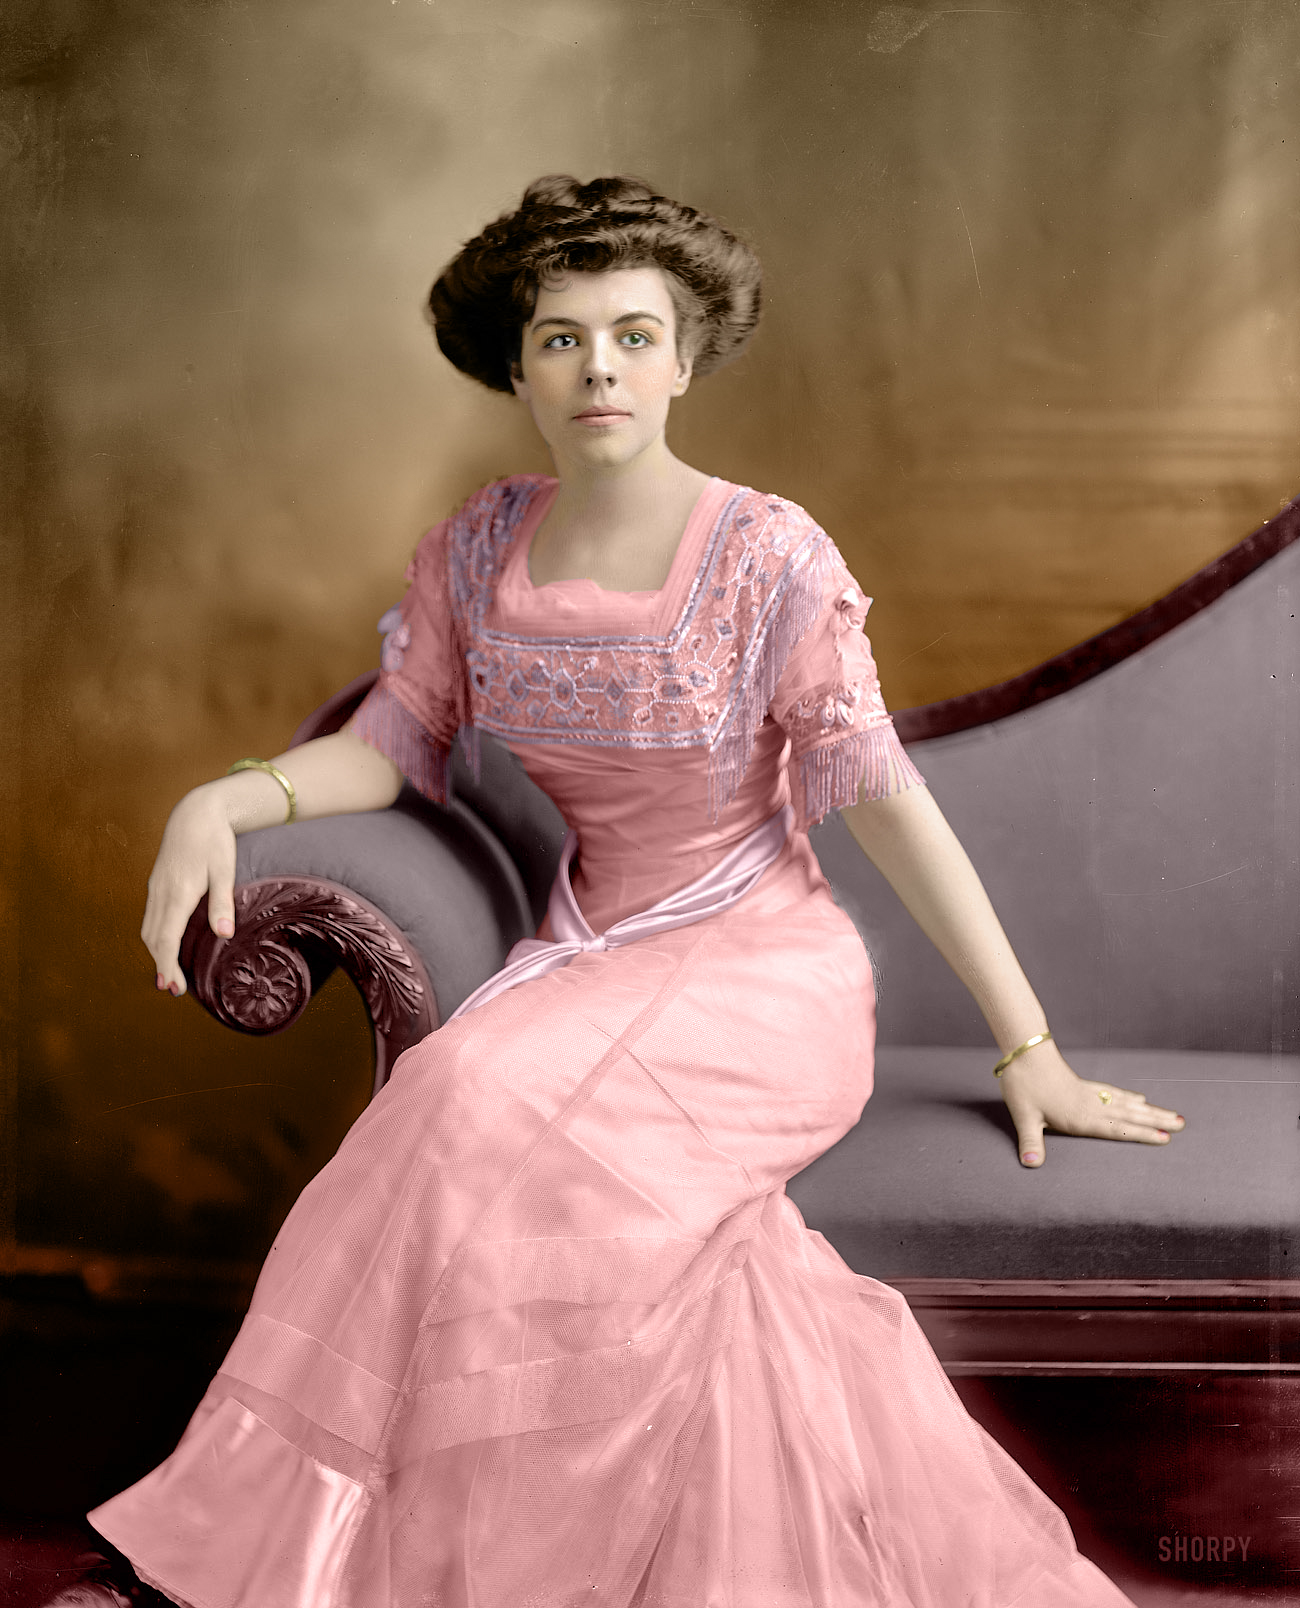 This image was colorized from this Shorpy original using Photoshop. View full size.